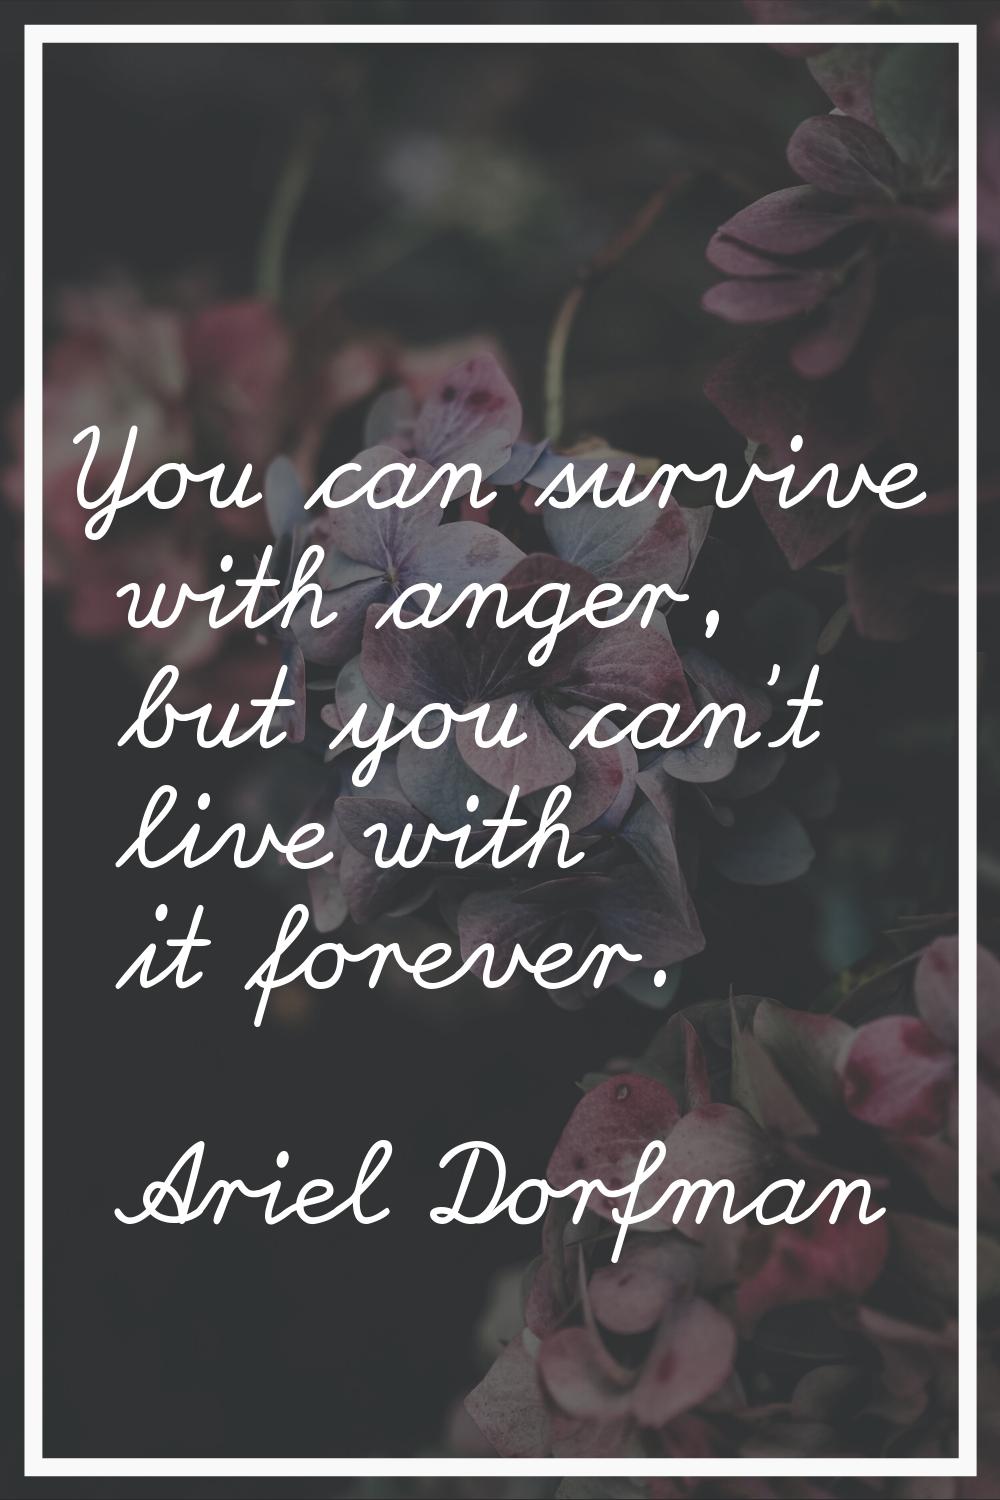 You can survive with anger, but you can't live with it forever.